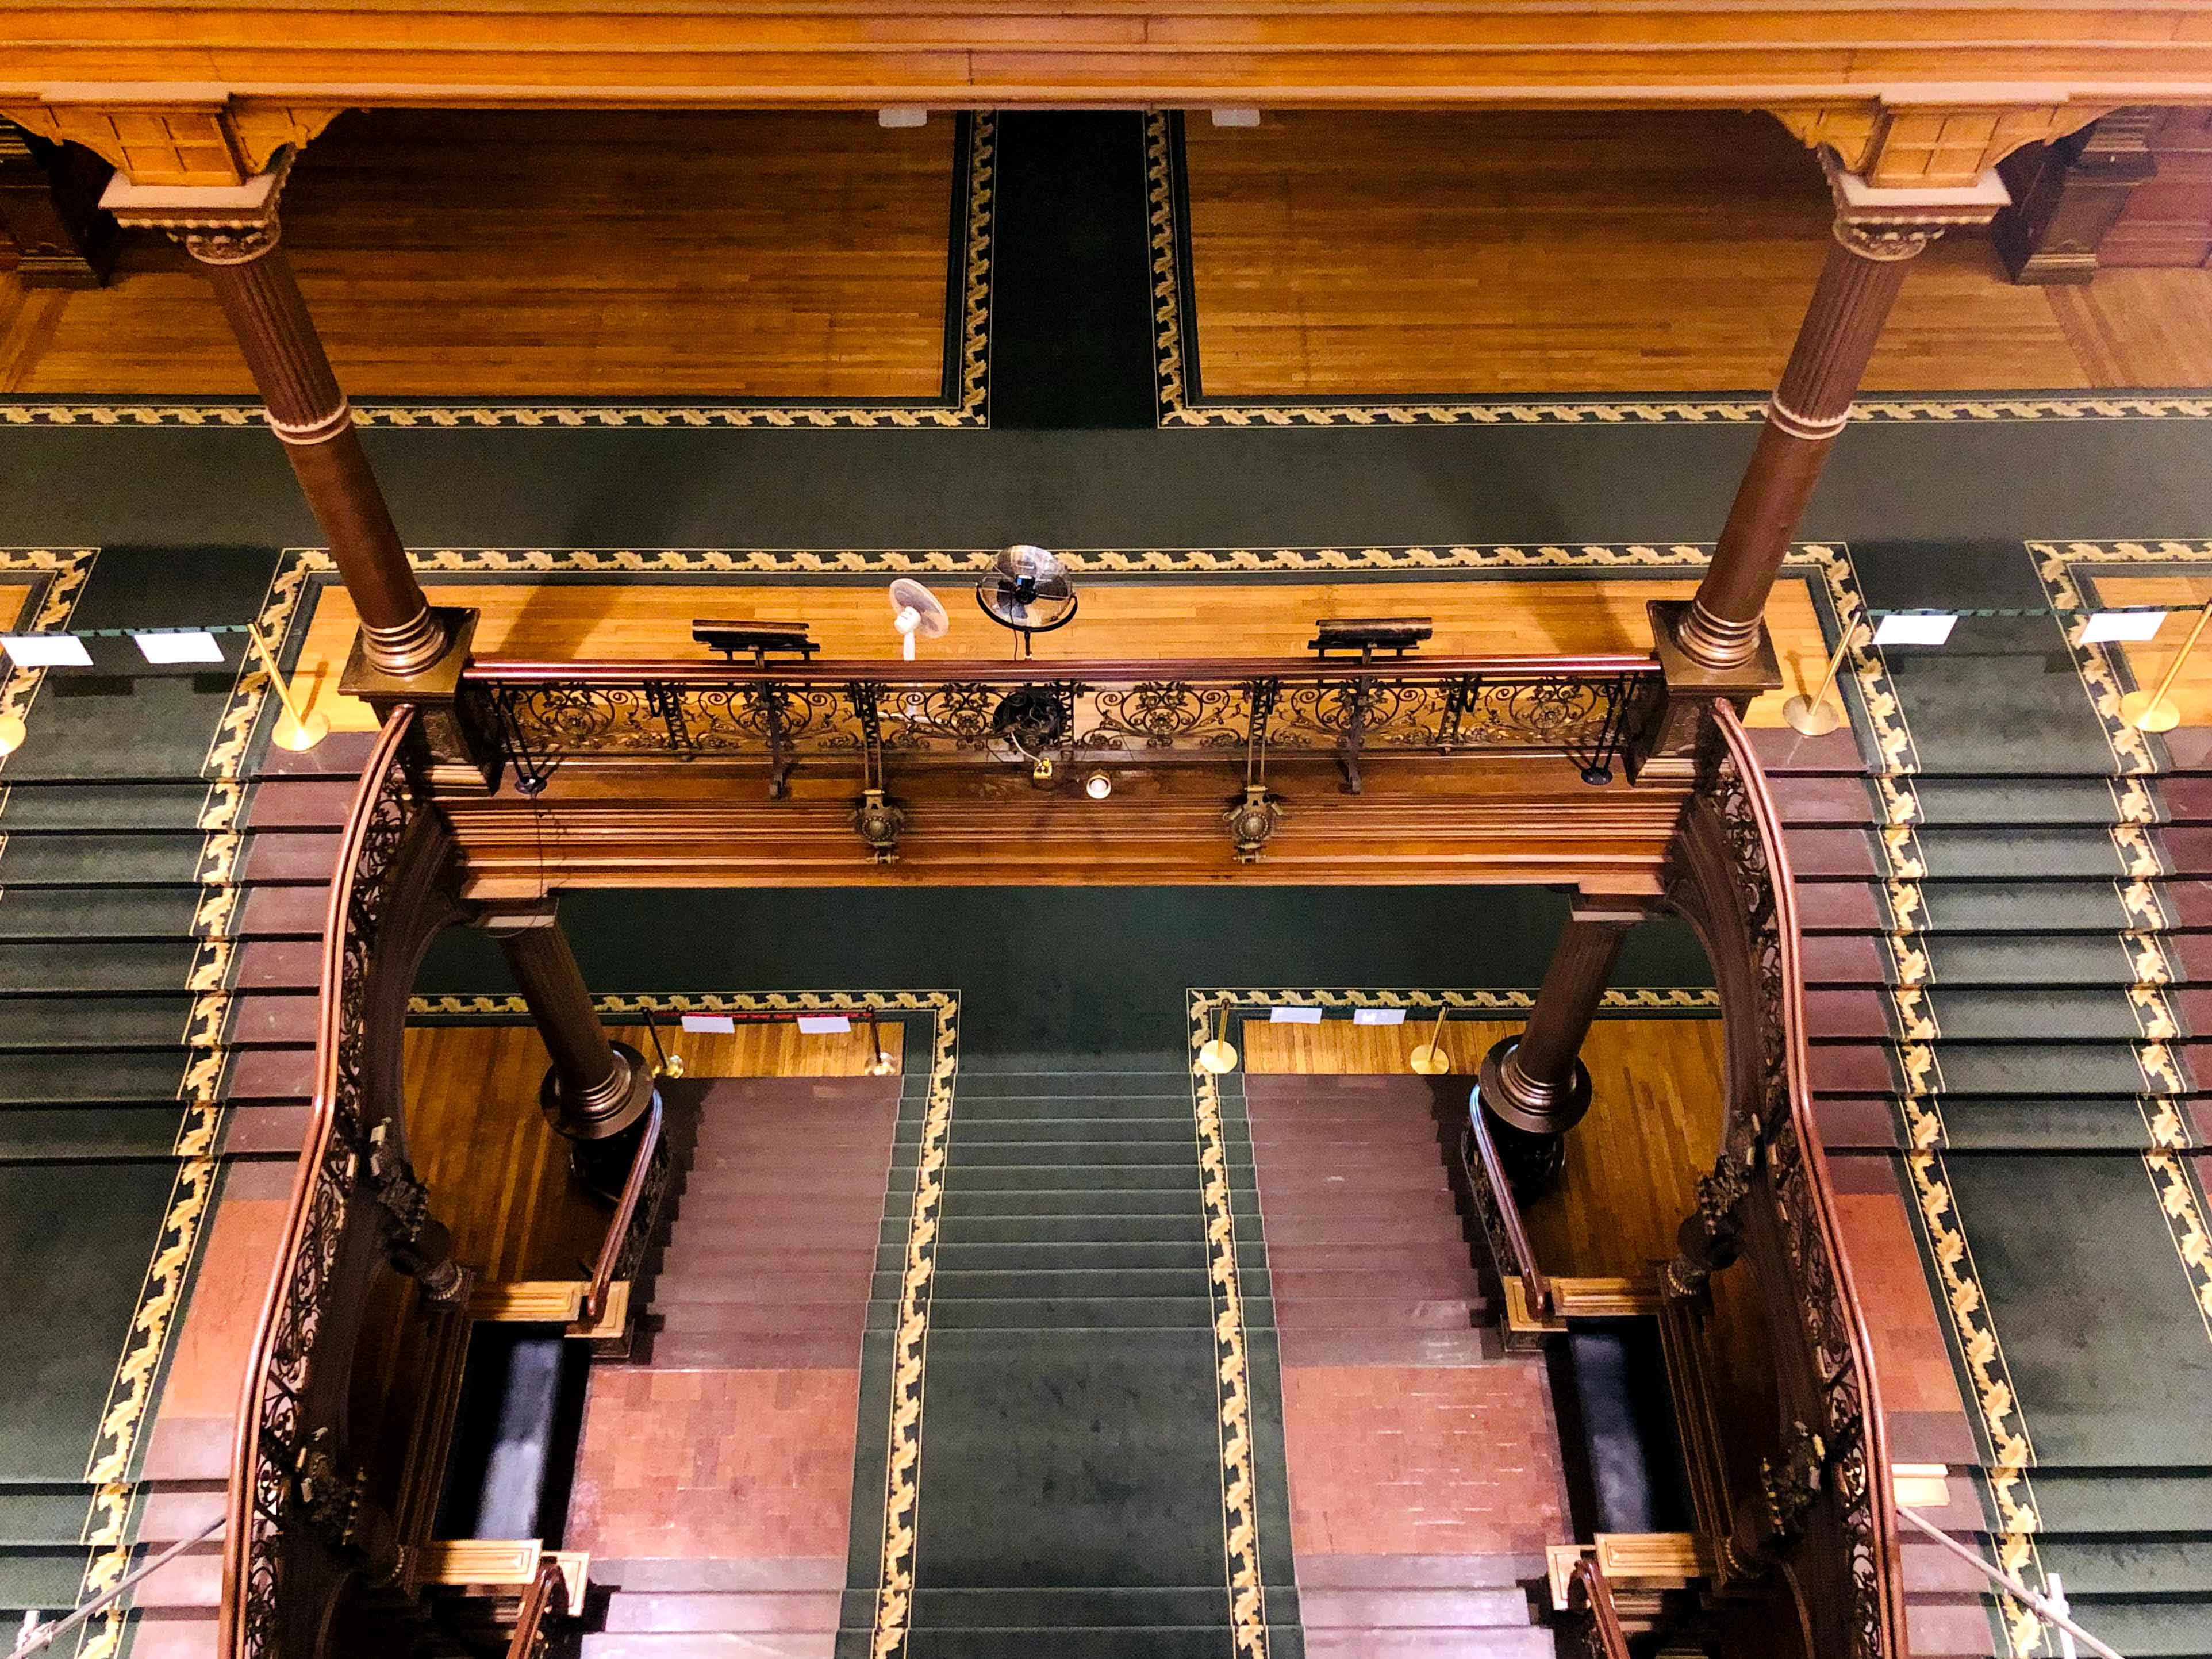 A top down view of the grand staircase showing the two levels, columns, and ironwork.